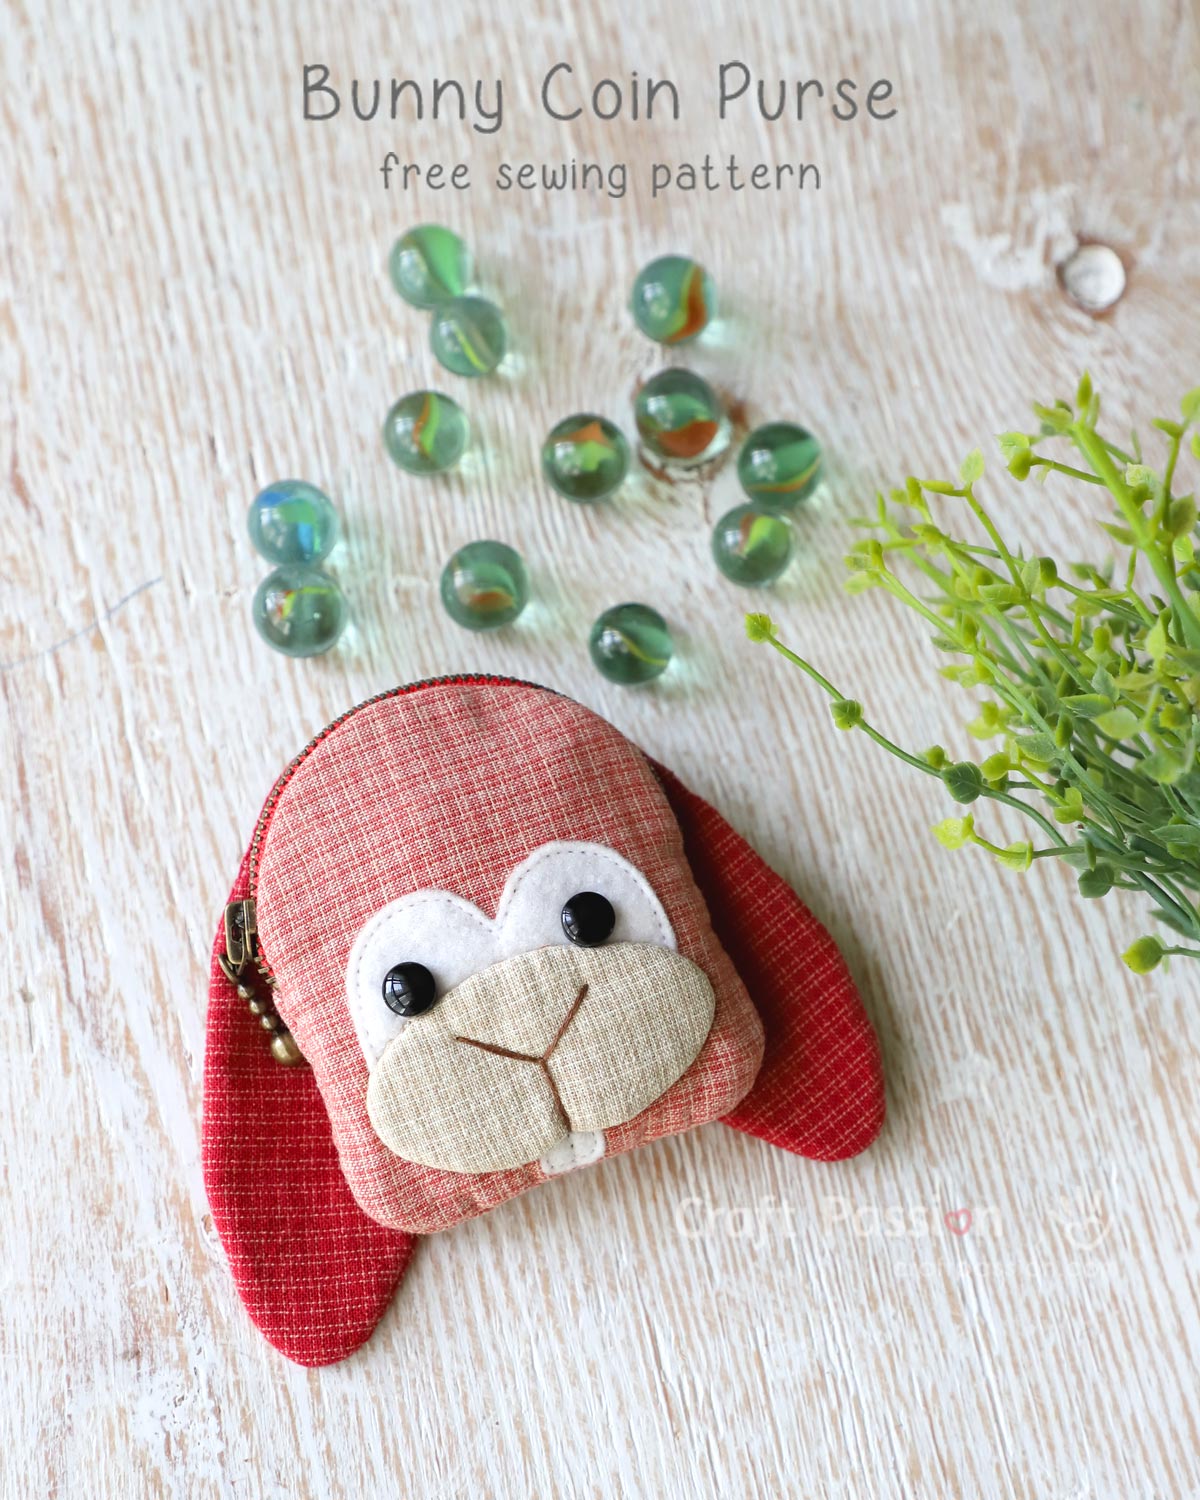 Free purse sewing pattern to sew an adorable bunny coin purse with zipper closure. A small bunny pattern purse with a pair of long ears in cherry color, in palm size.